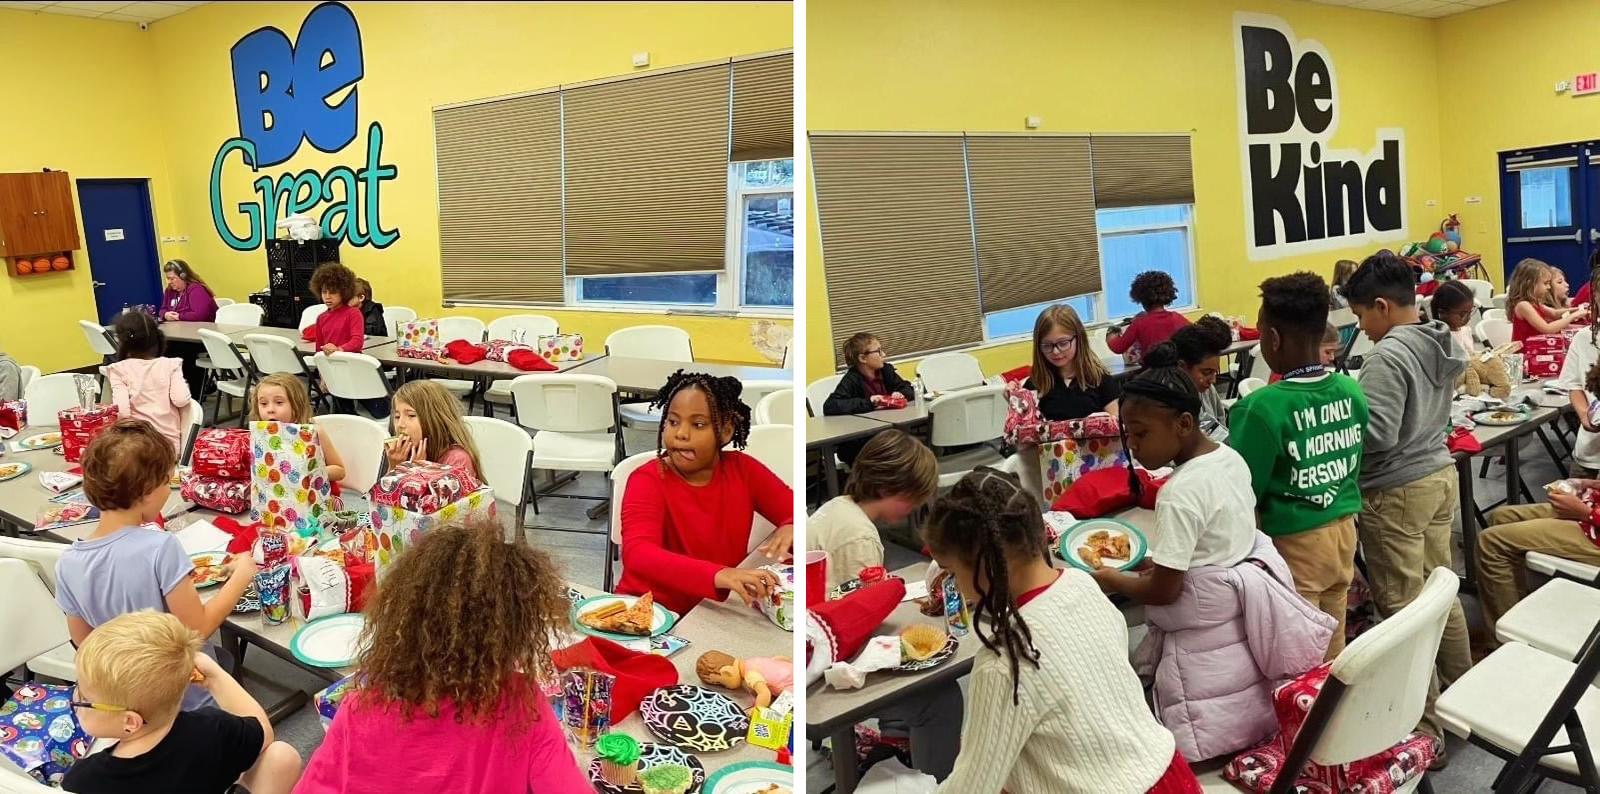 Ferman of Tarpon Springs sponsors a Christmas Pizza party and gift giving for the Boys & Girls club of the Suncoast